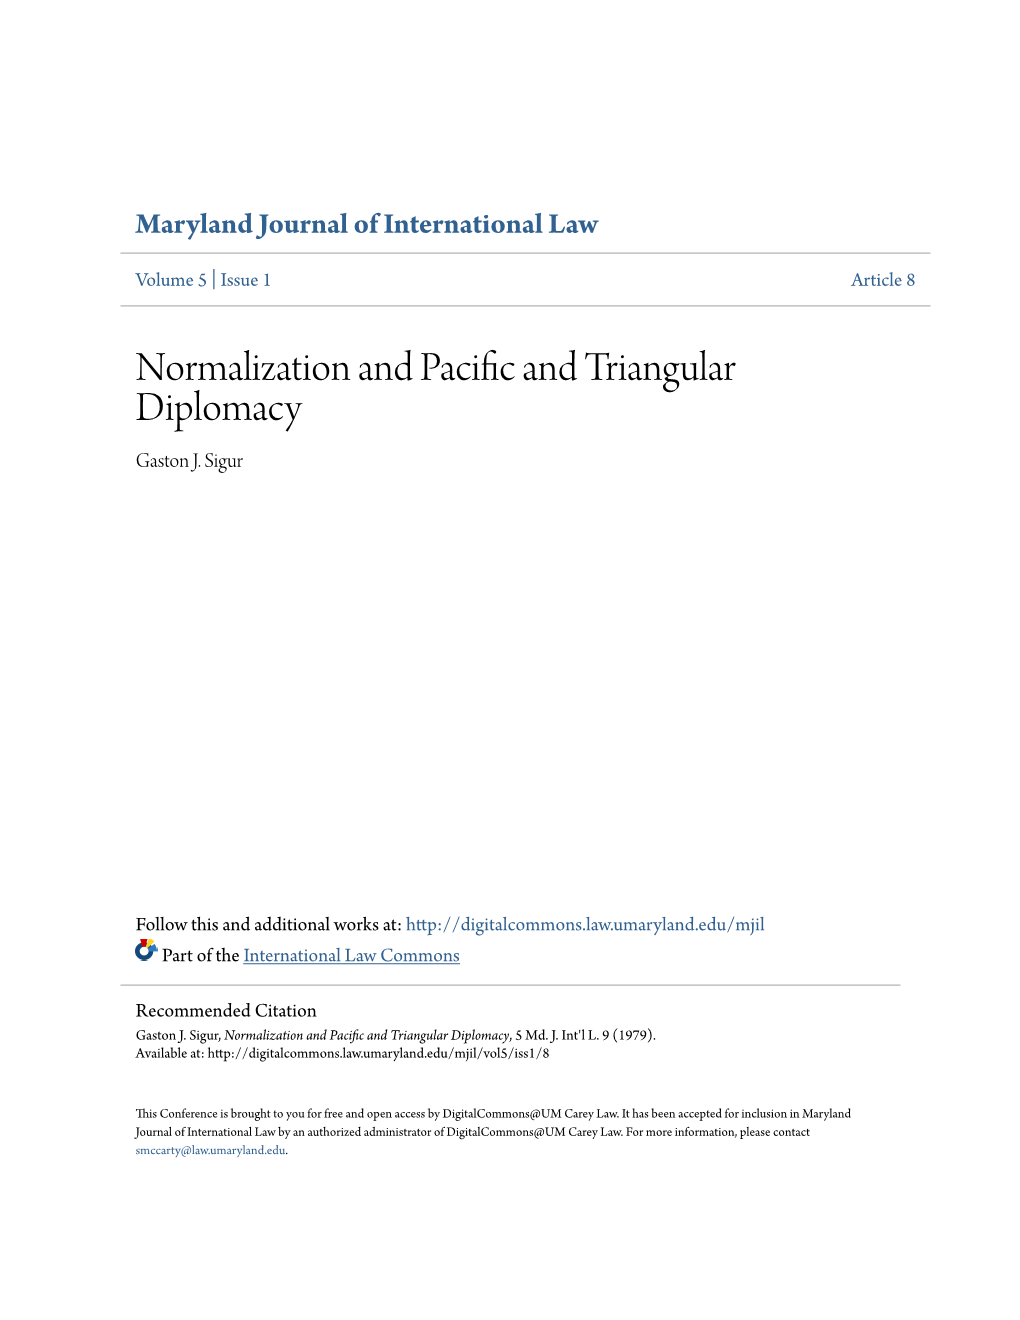 Normalization and Pacific and Triangular Diplomacy